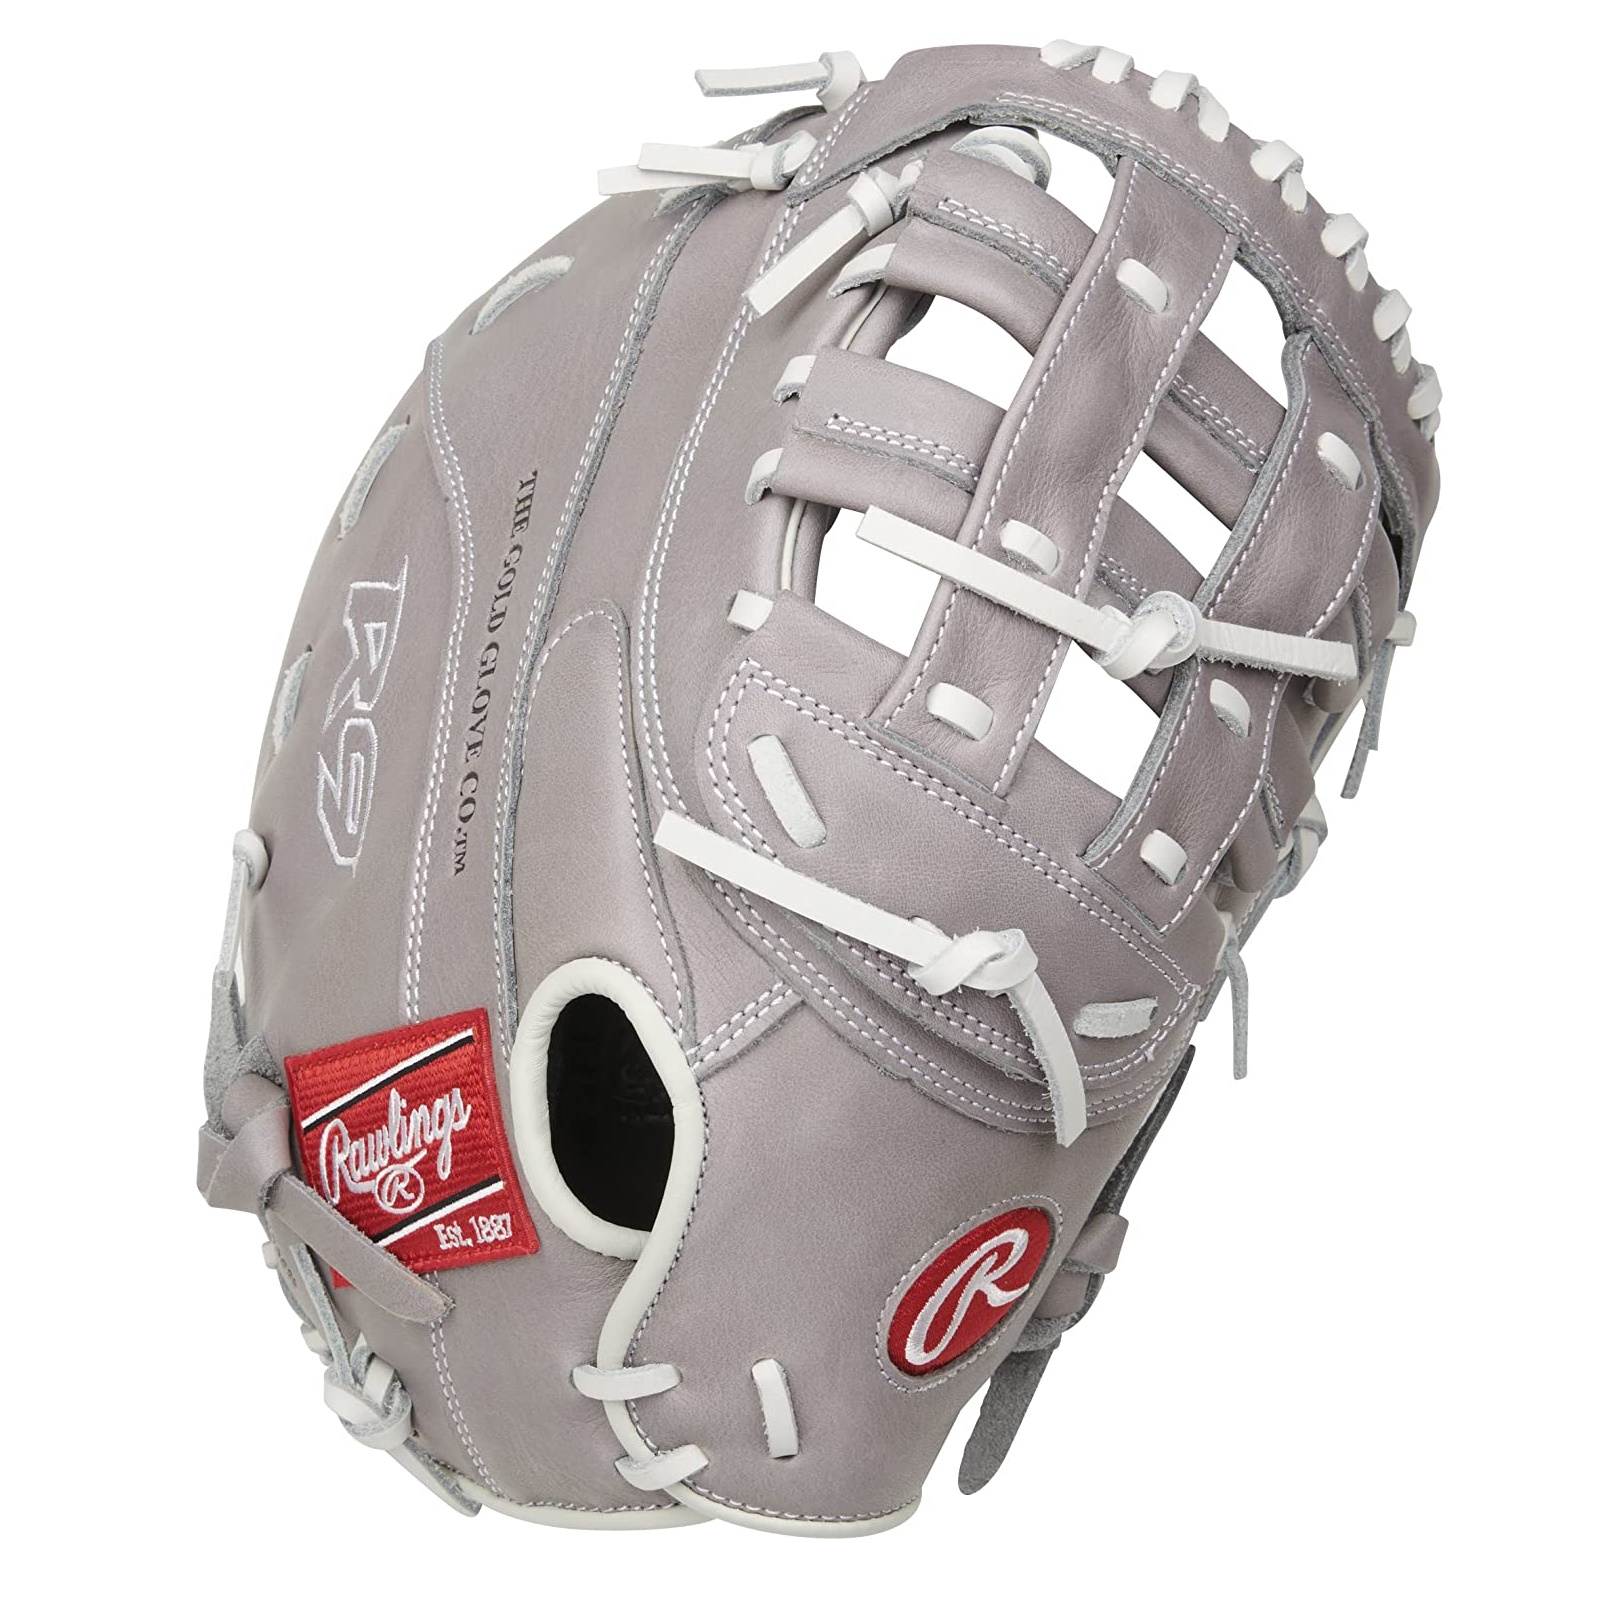 rawlings-r9-series-fastpitch-softball-first-base-mitt-mod-pro-h-web-12-5-inch-right-hand-throw R9SBFBM-17G-RightHandThrow Rawlings  The all new R9 Series softball gloves are the best gloves